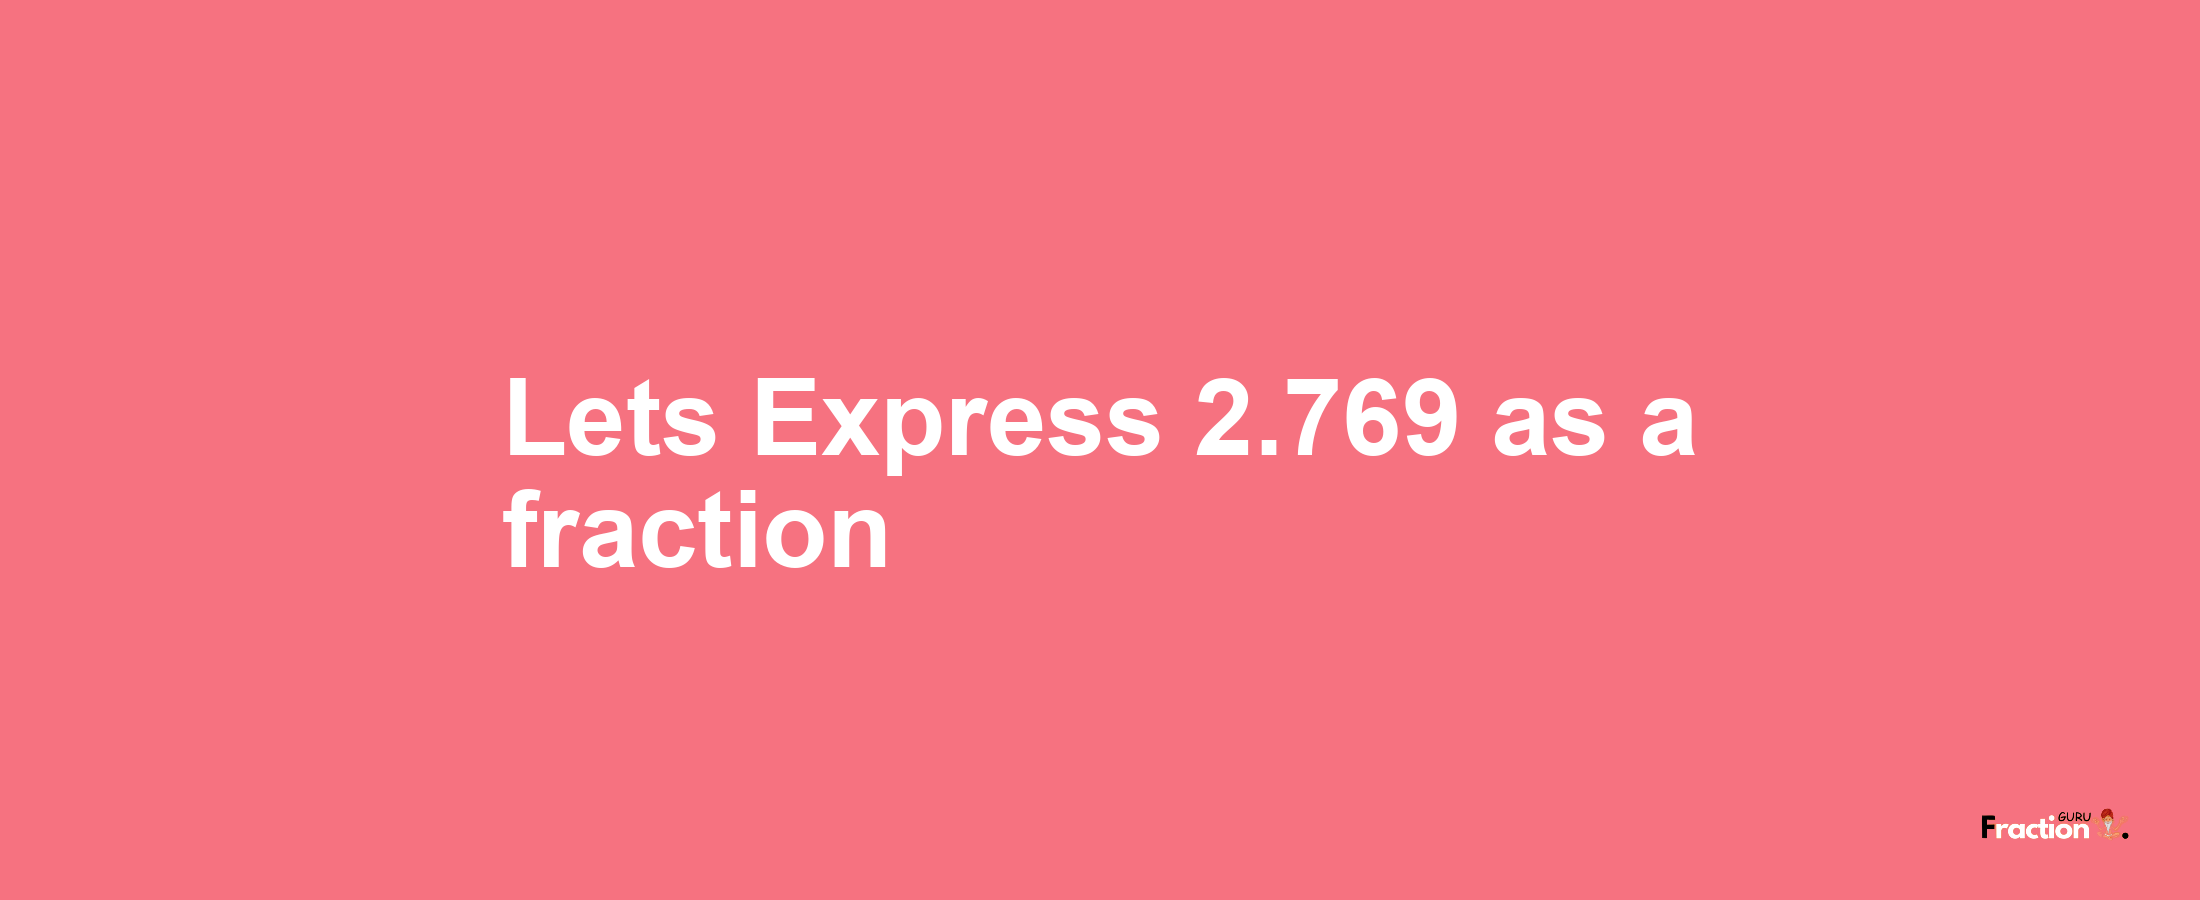 Lets Express 2.769 as afraction